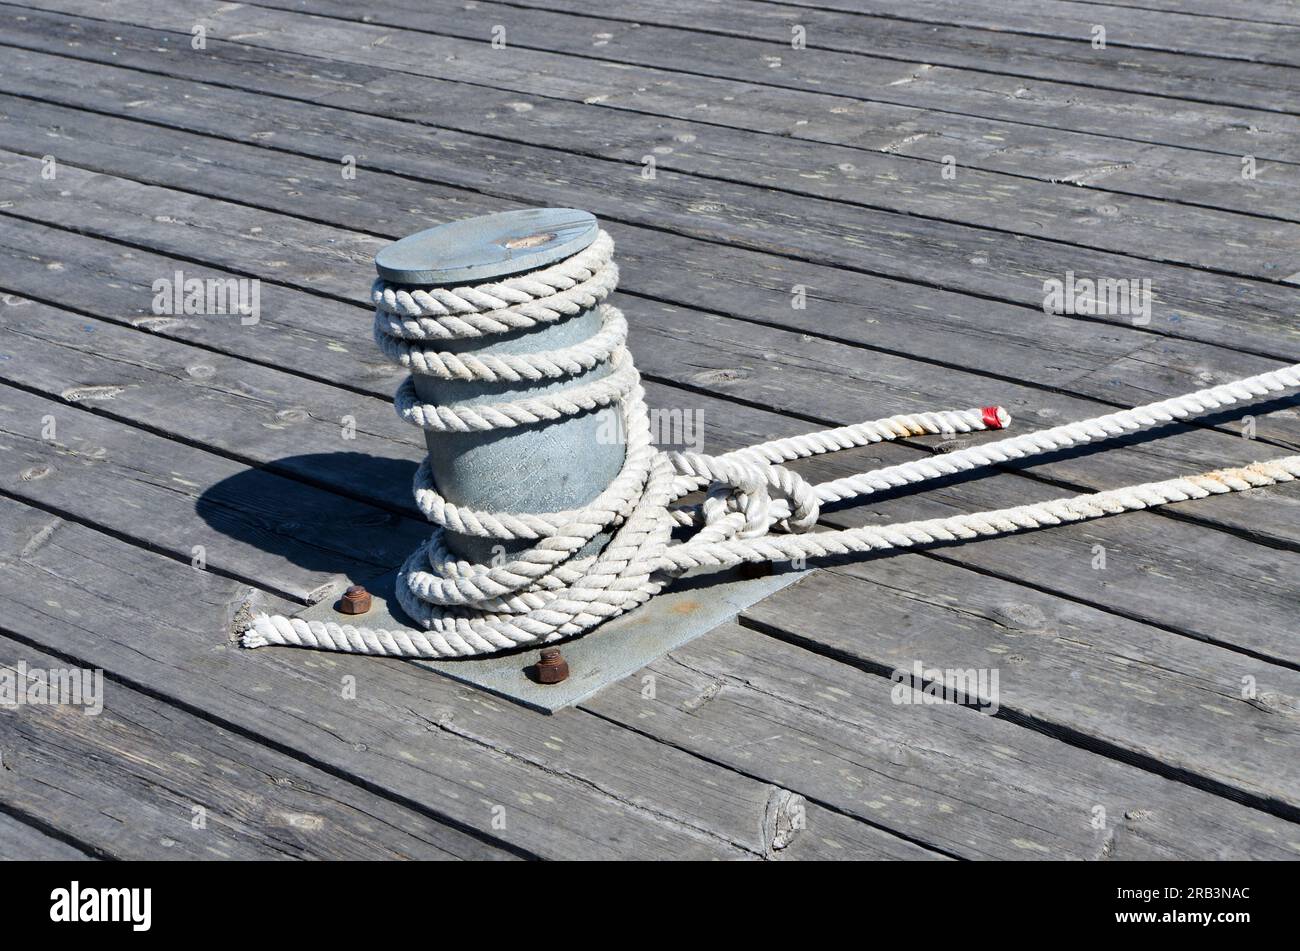 Bollard with mooring rope on wooden quay in a harbor. Stock Photo